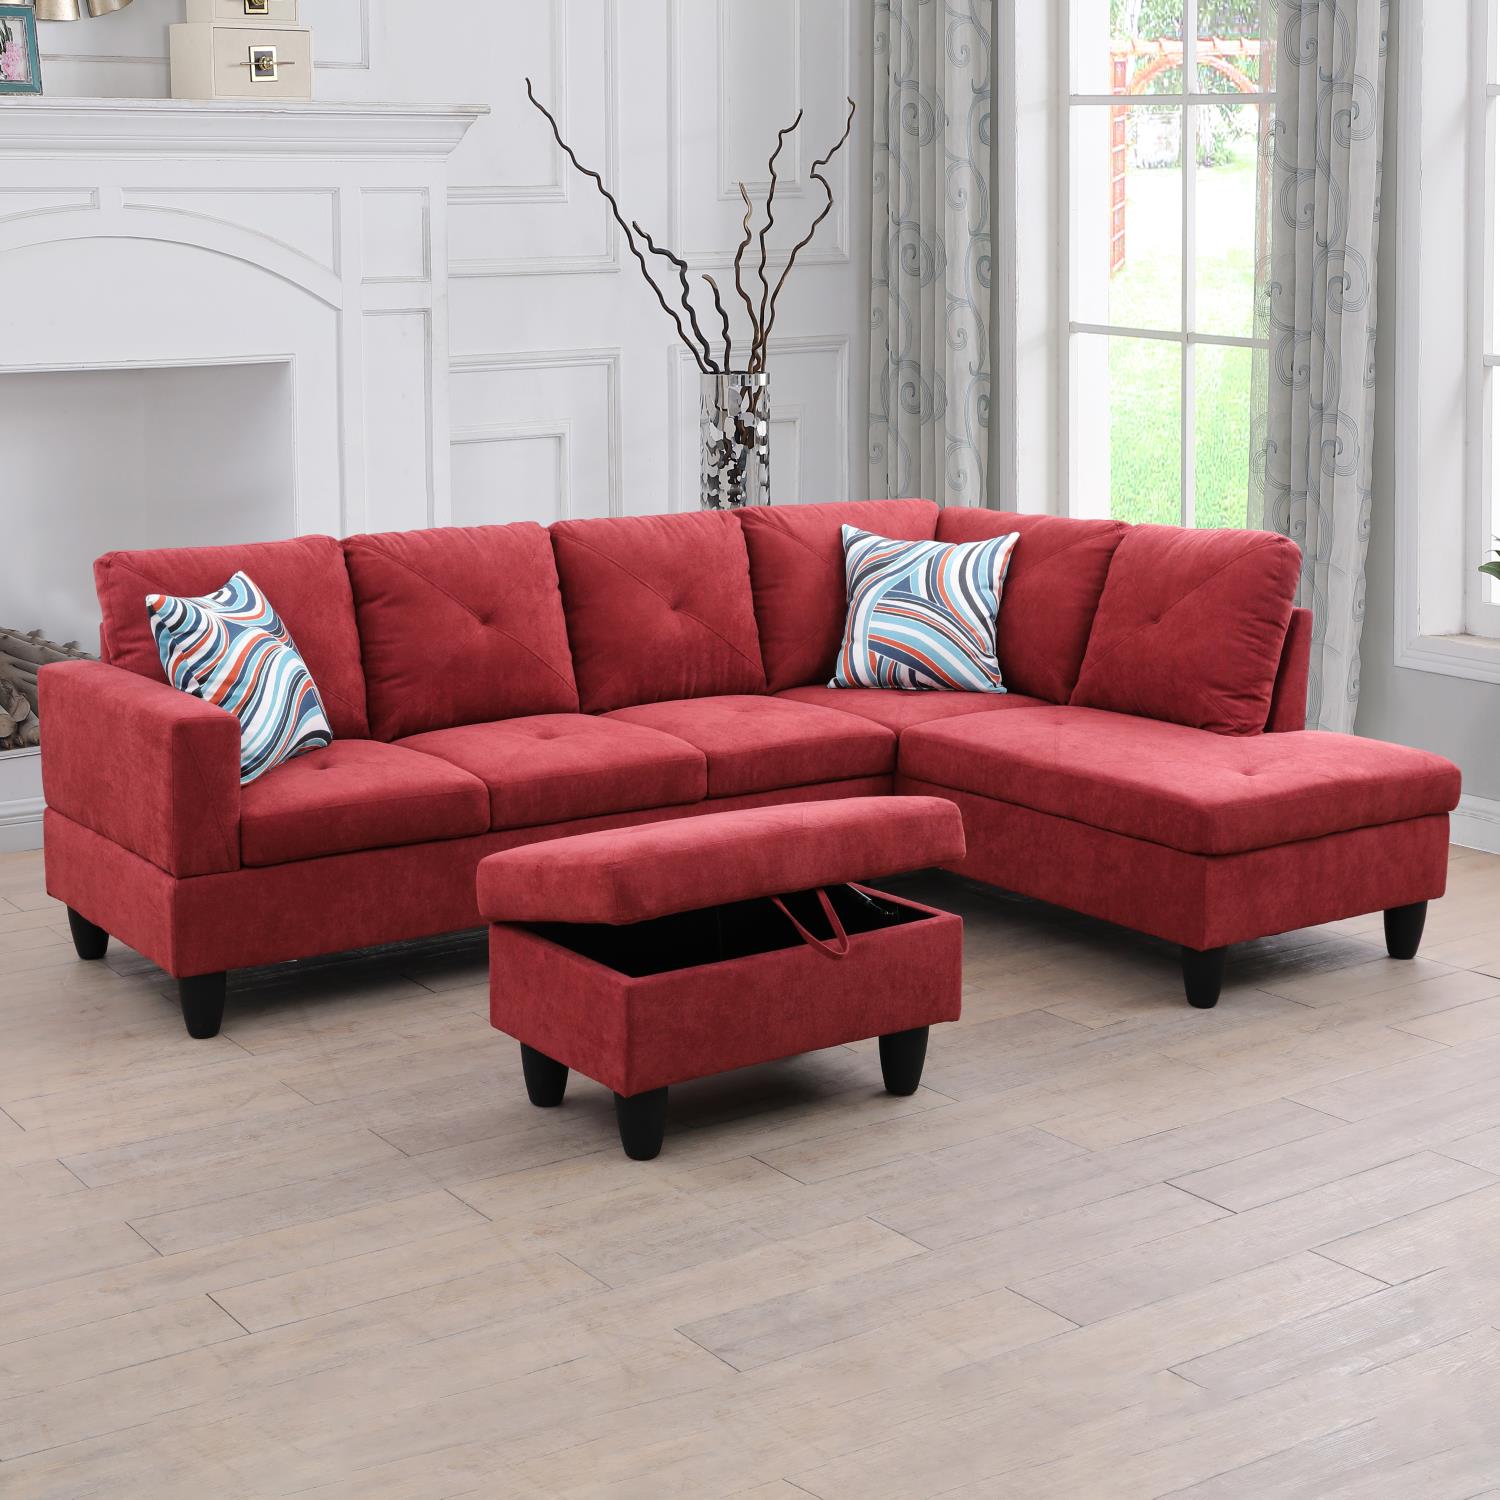 Ainehome Red L-Shaped Flannel Combo Sofa Set